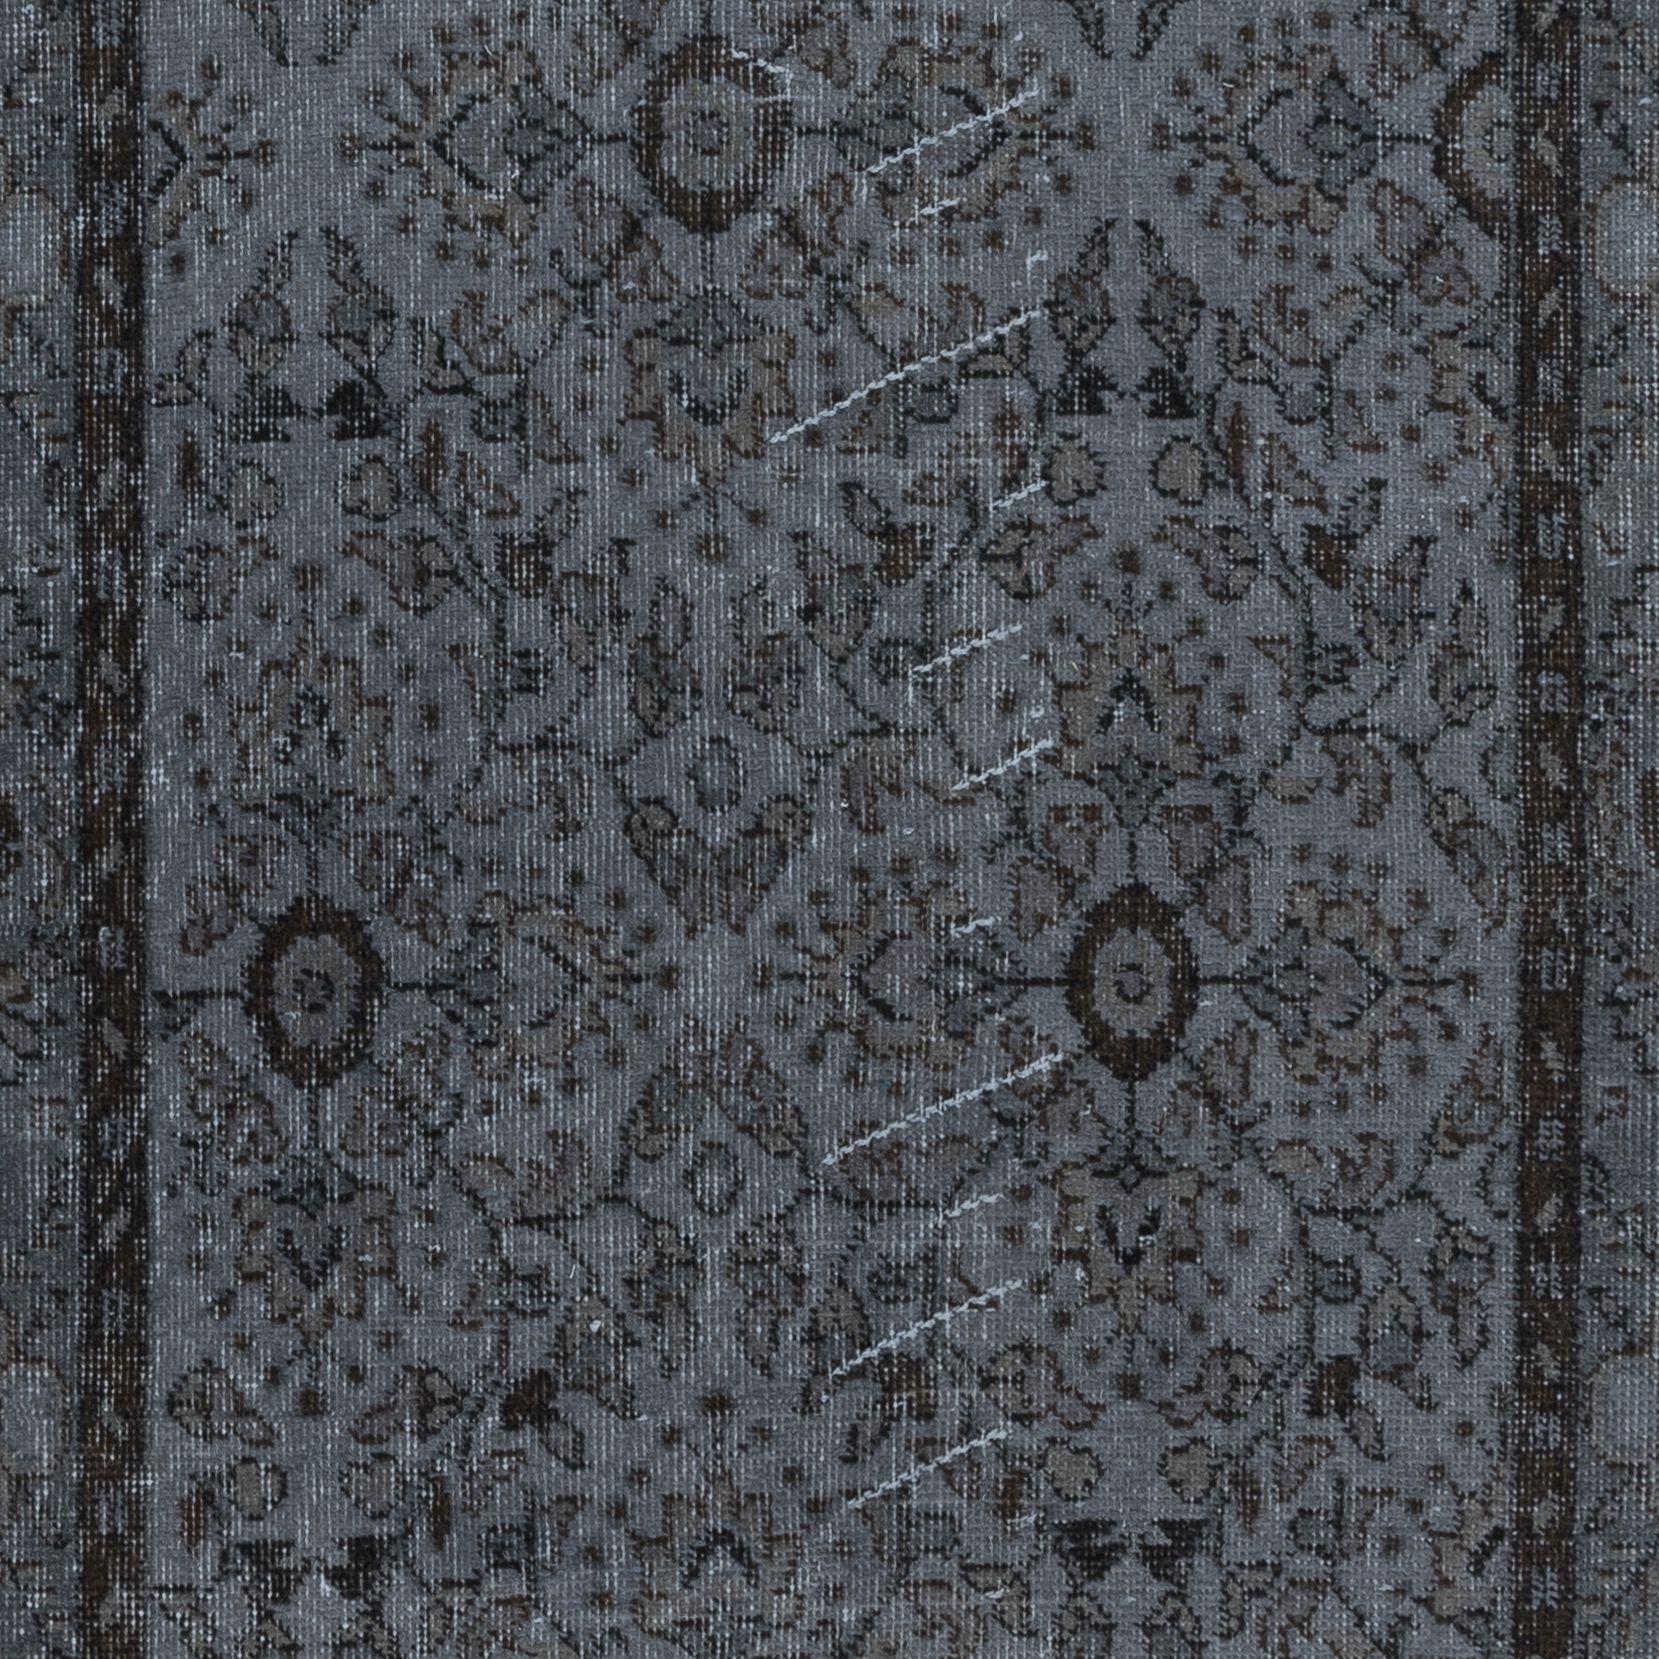 Hand-Woven 3.6x6.8 Ft Small Handmade Turkish Rug with Iron Gray Field and Floral Design